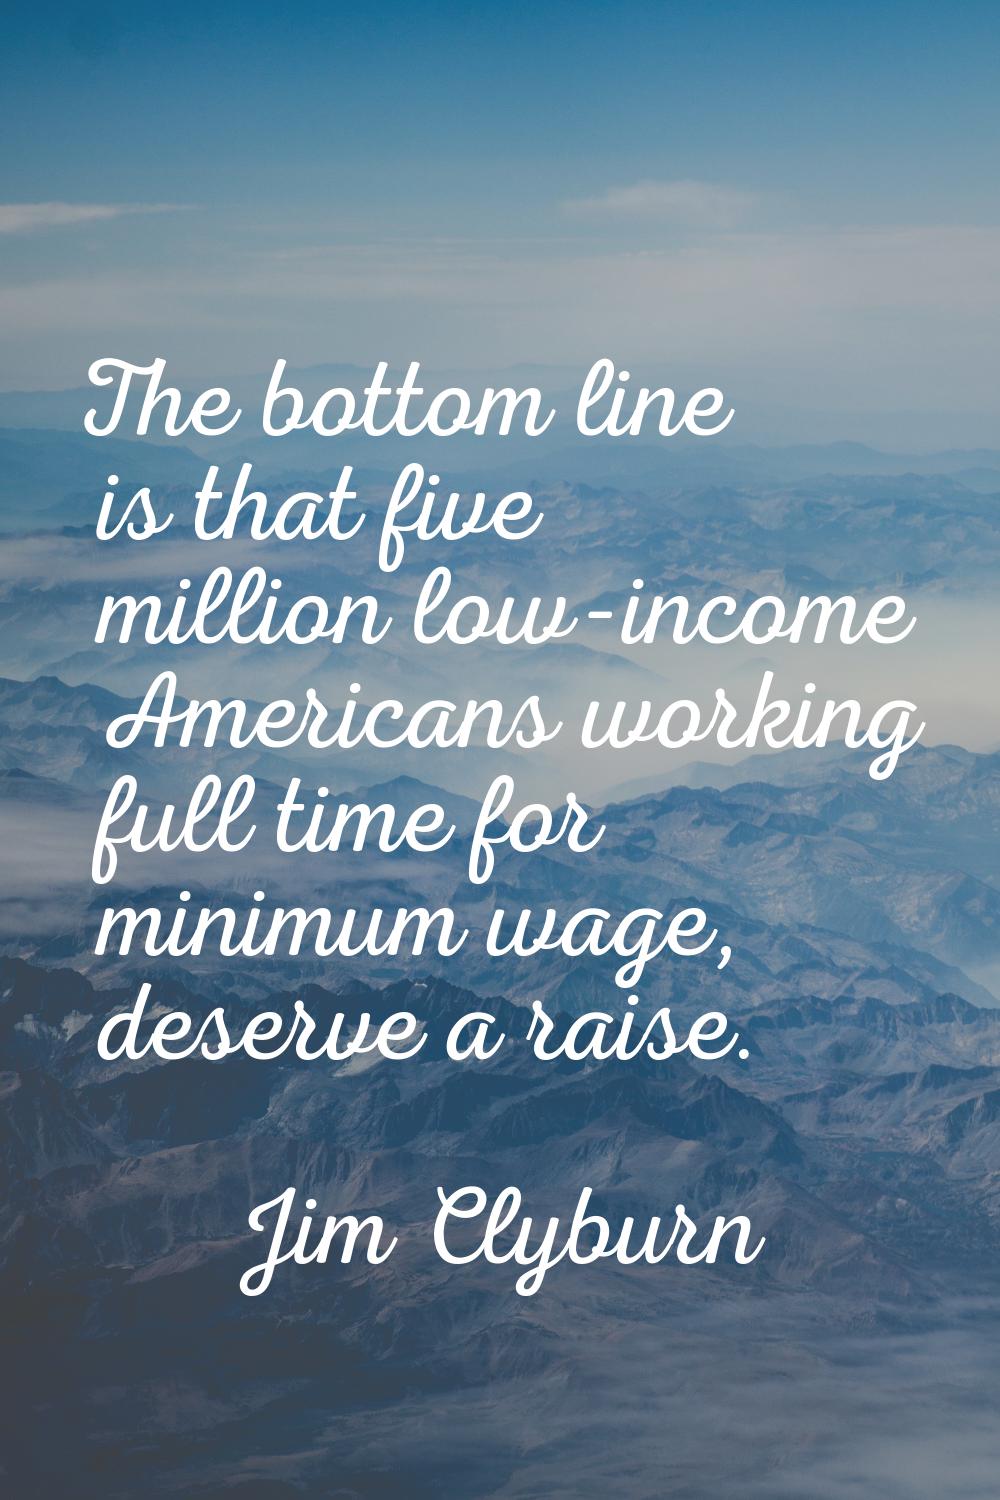 The bottom line is that five million low-income Americans working full time for minimum wage, deser